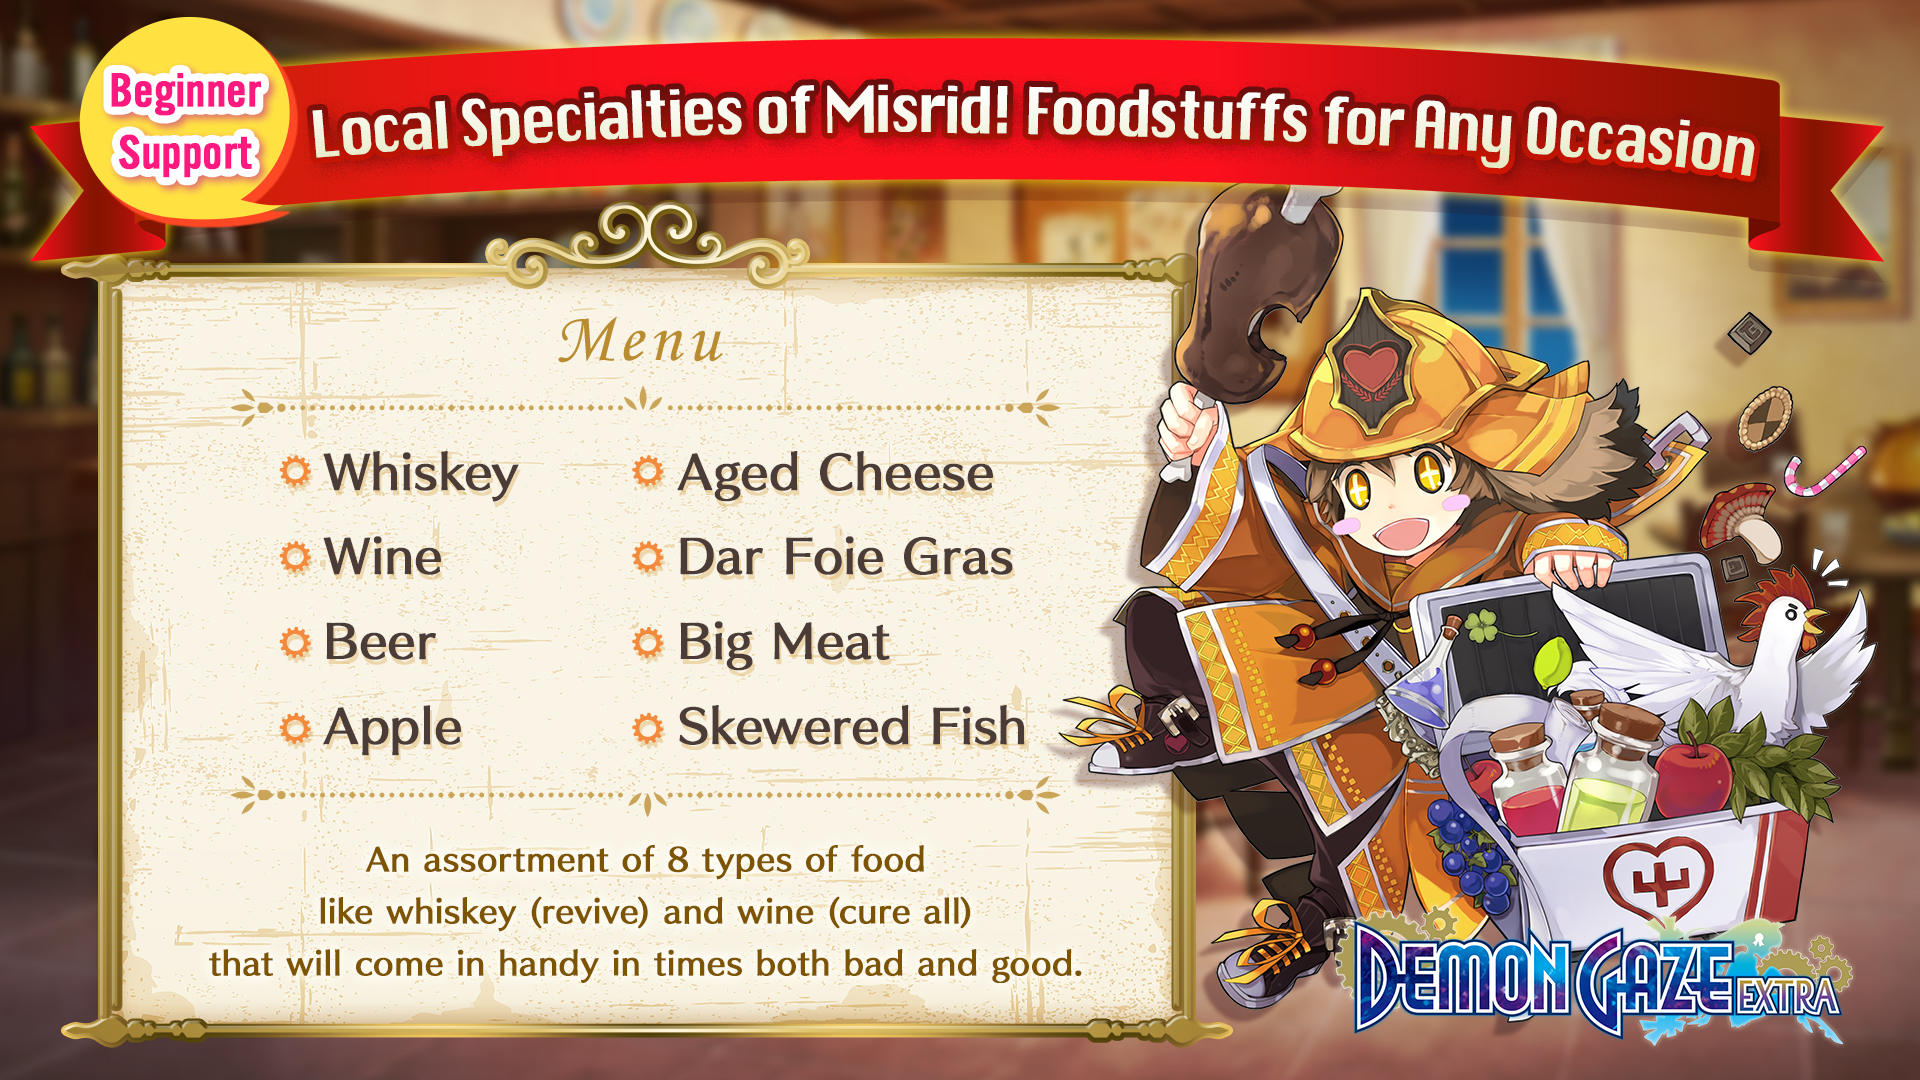 Local Specialties of Misrid! Foodstuffs for Any Occasion